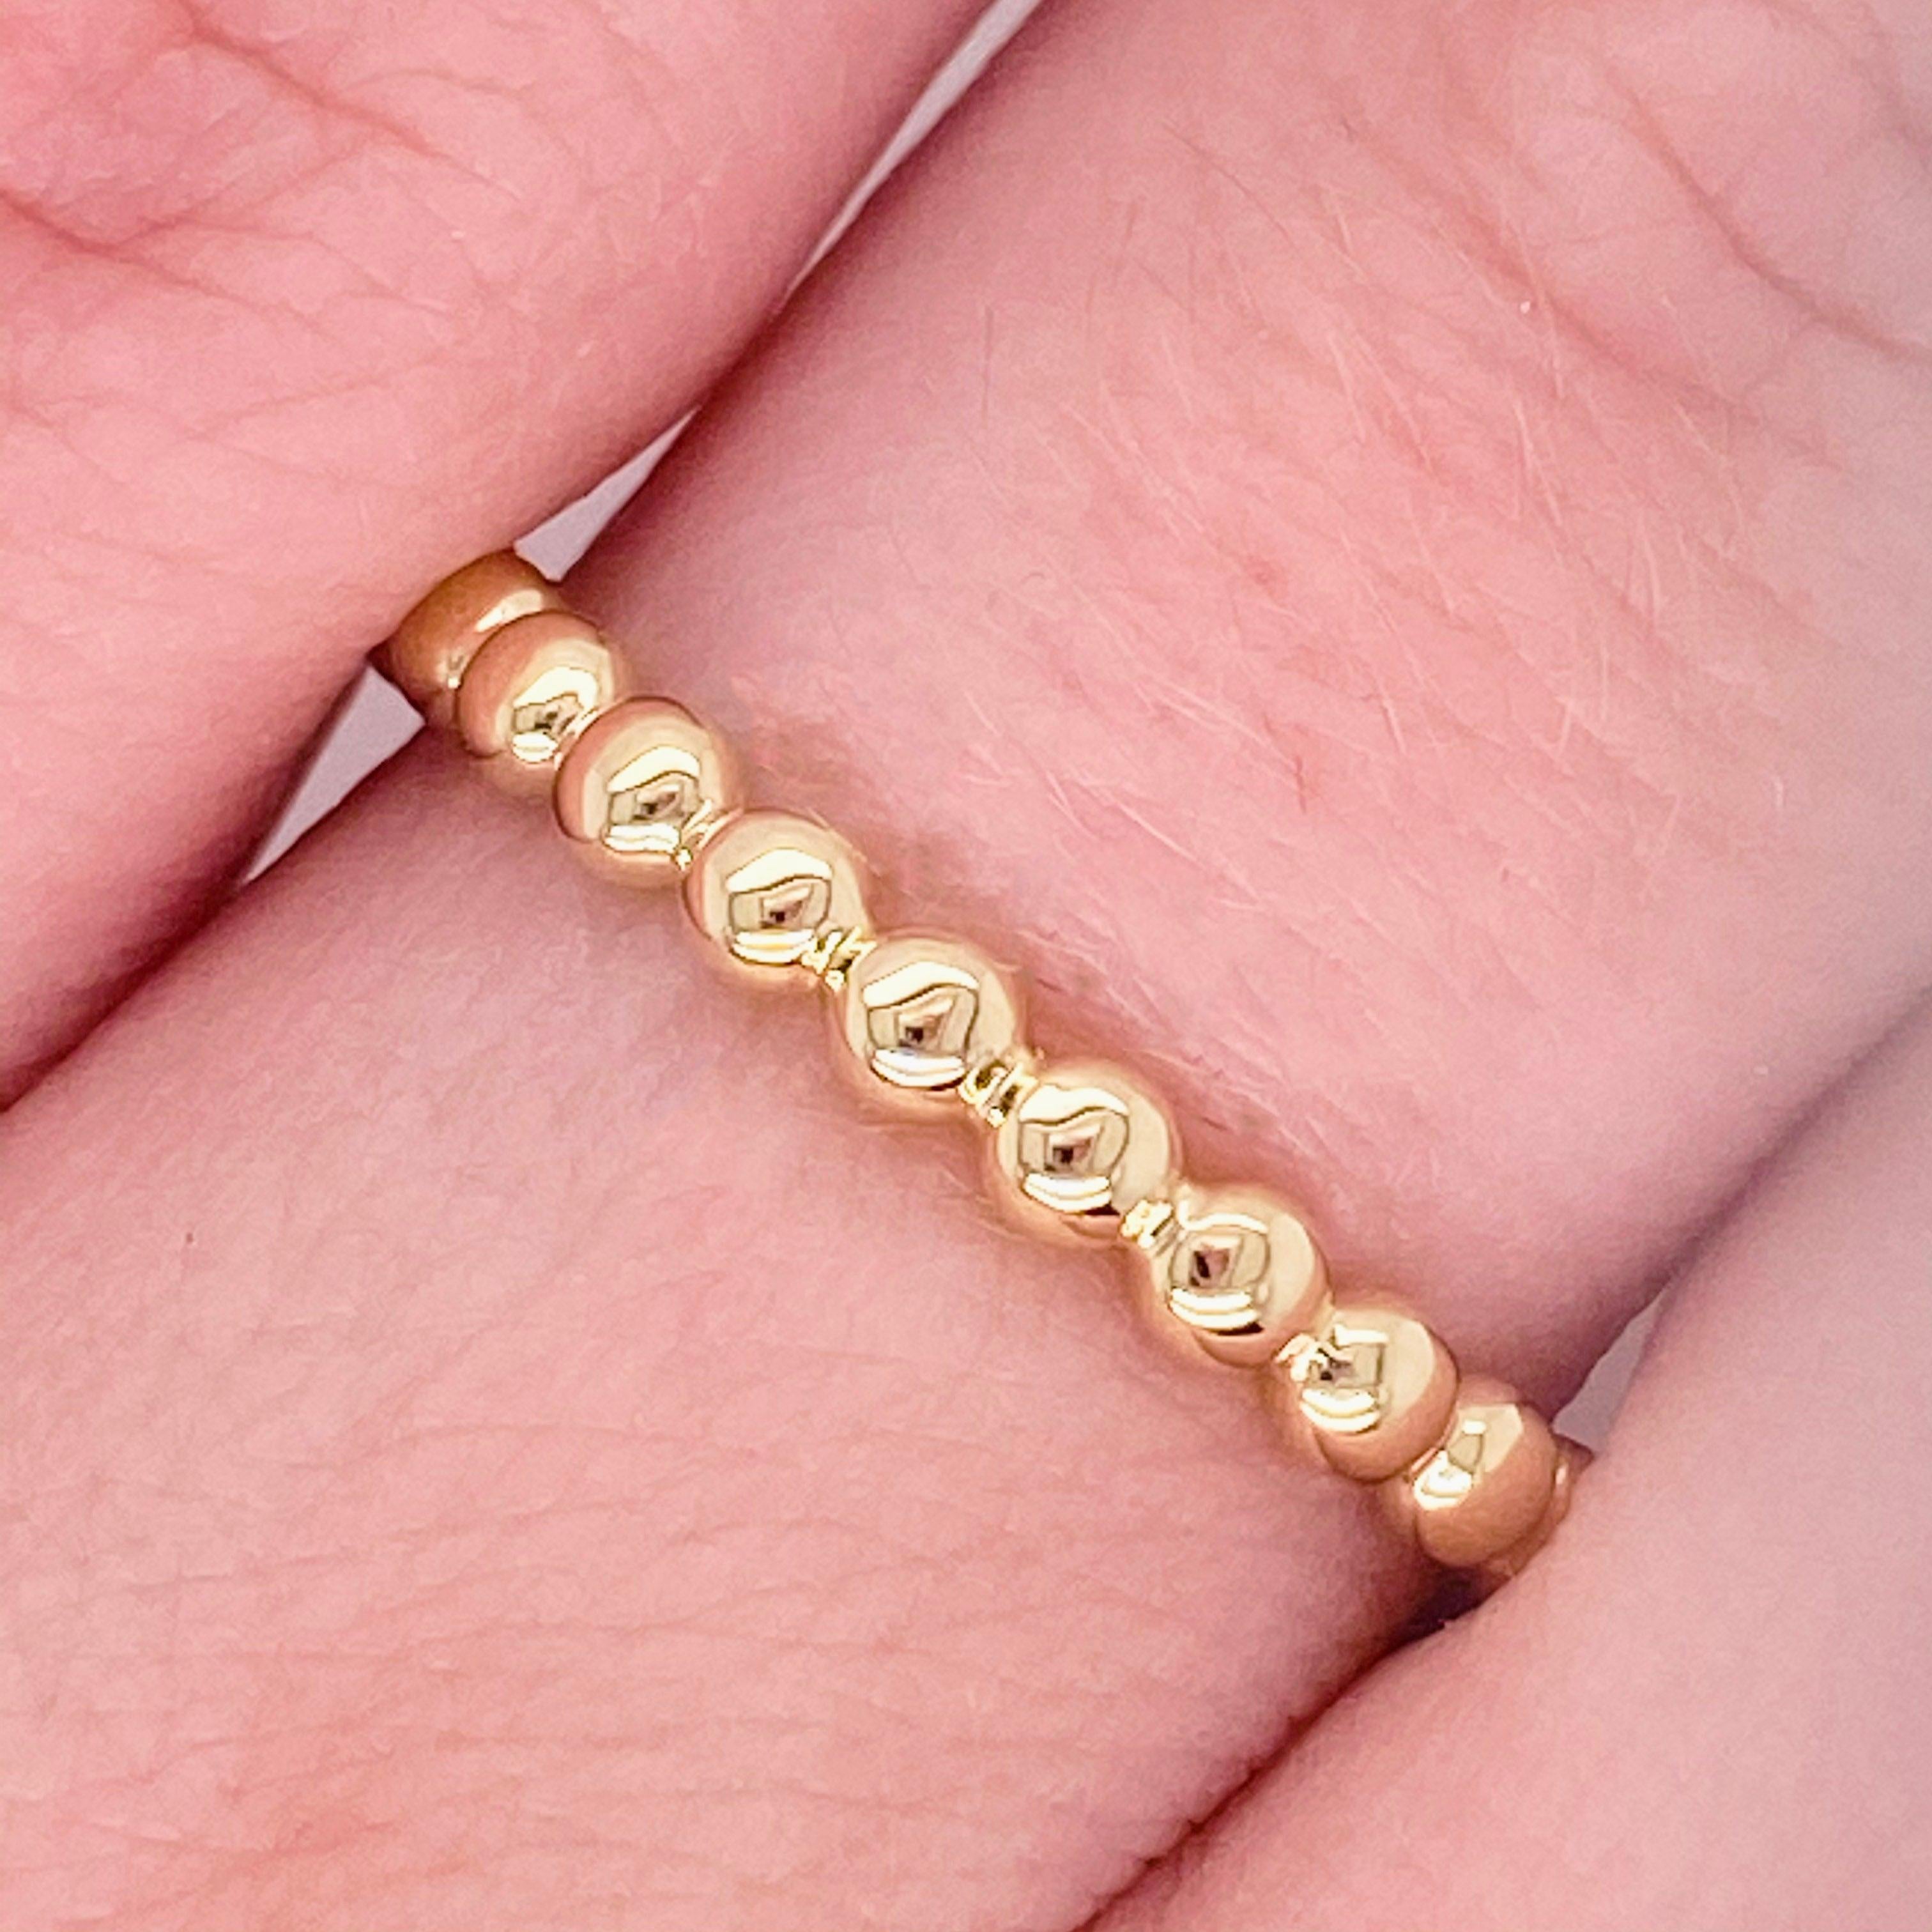 For Sale:  Gold Beaded Ring, 14 Karat Yellow Gold Beaded Stackable Ring Band, 2021 Genuine 2